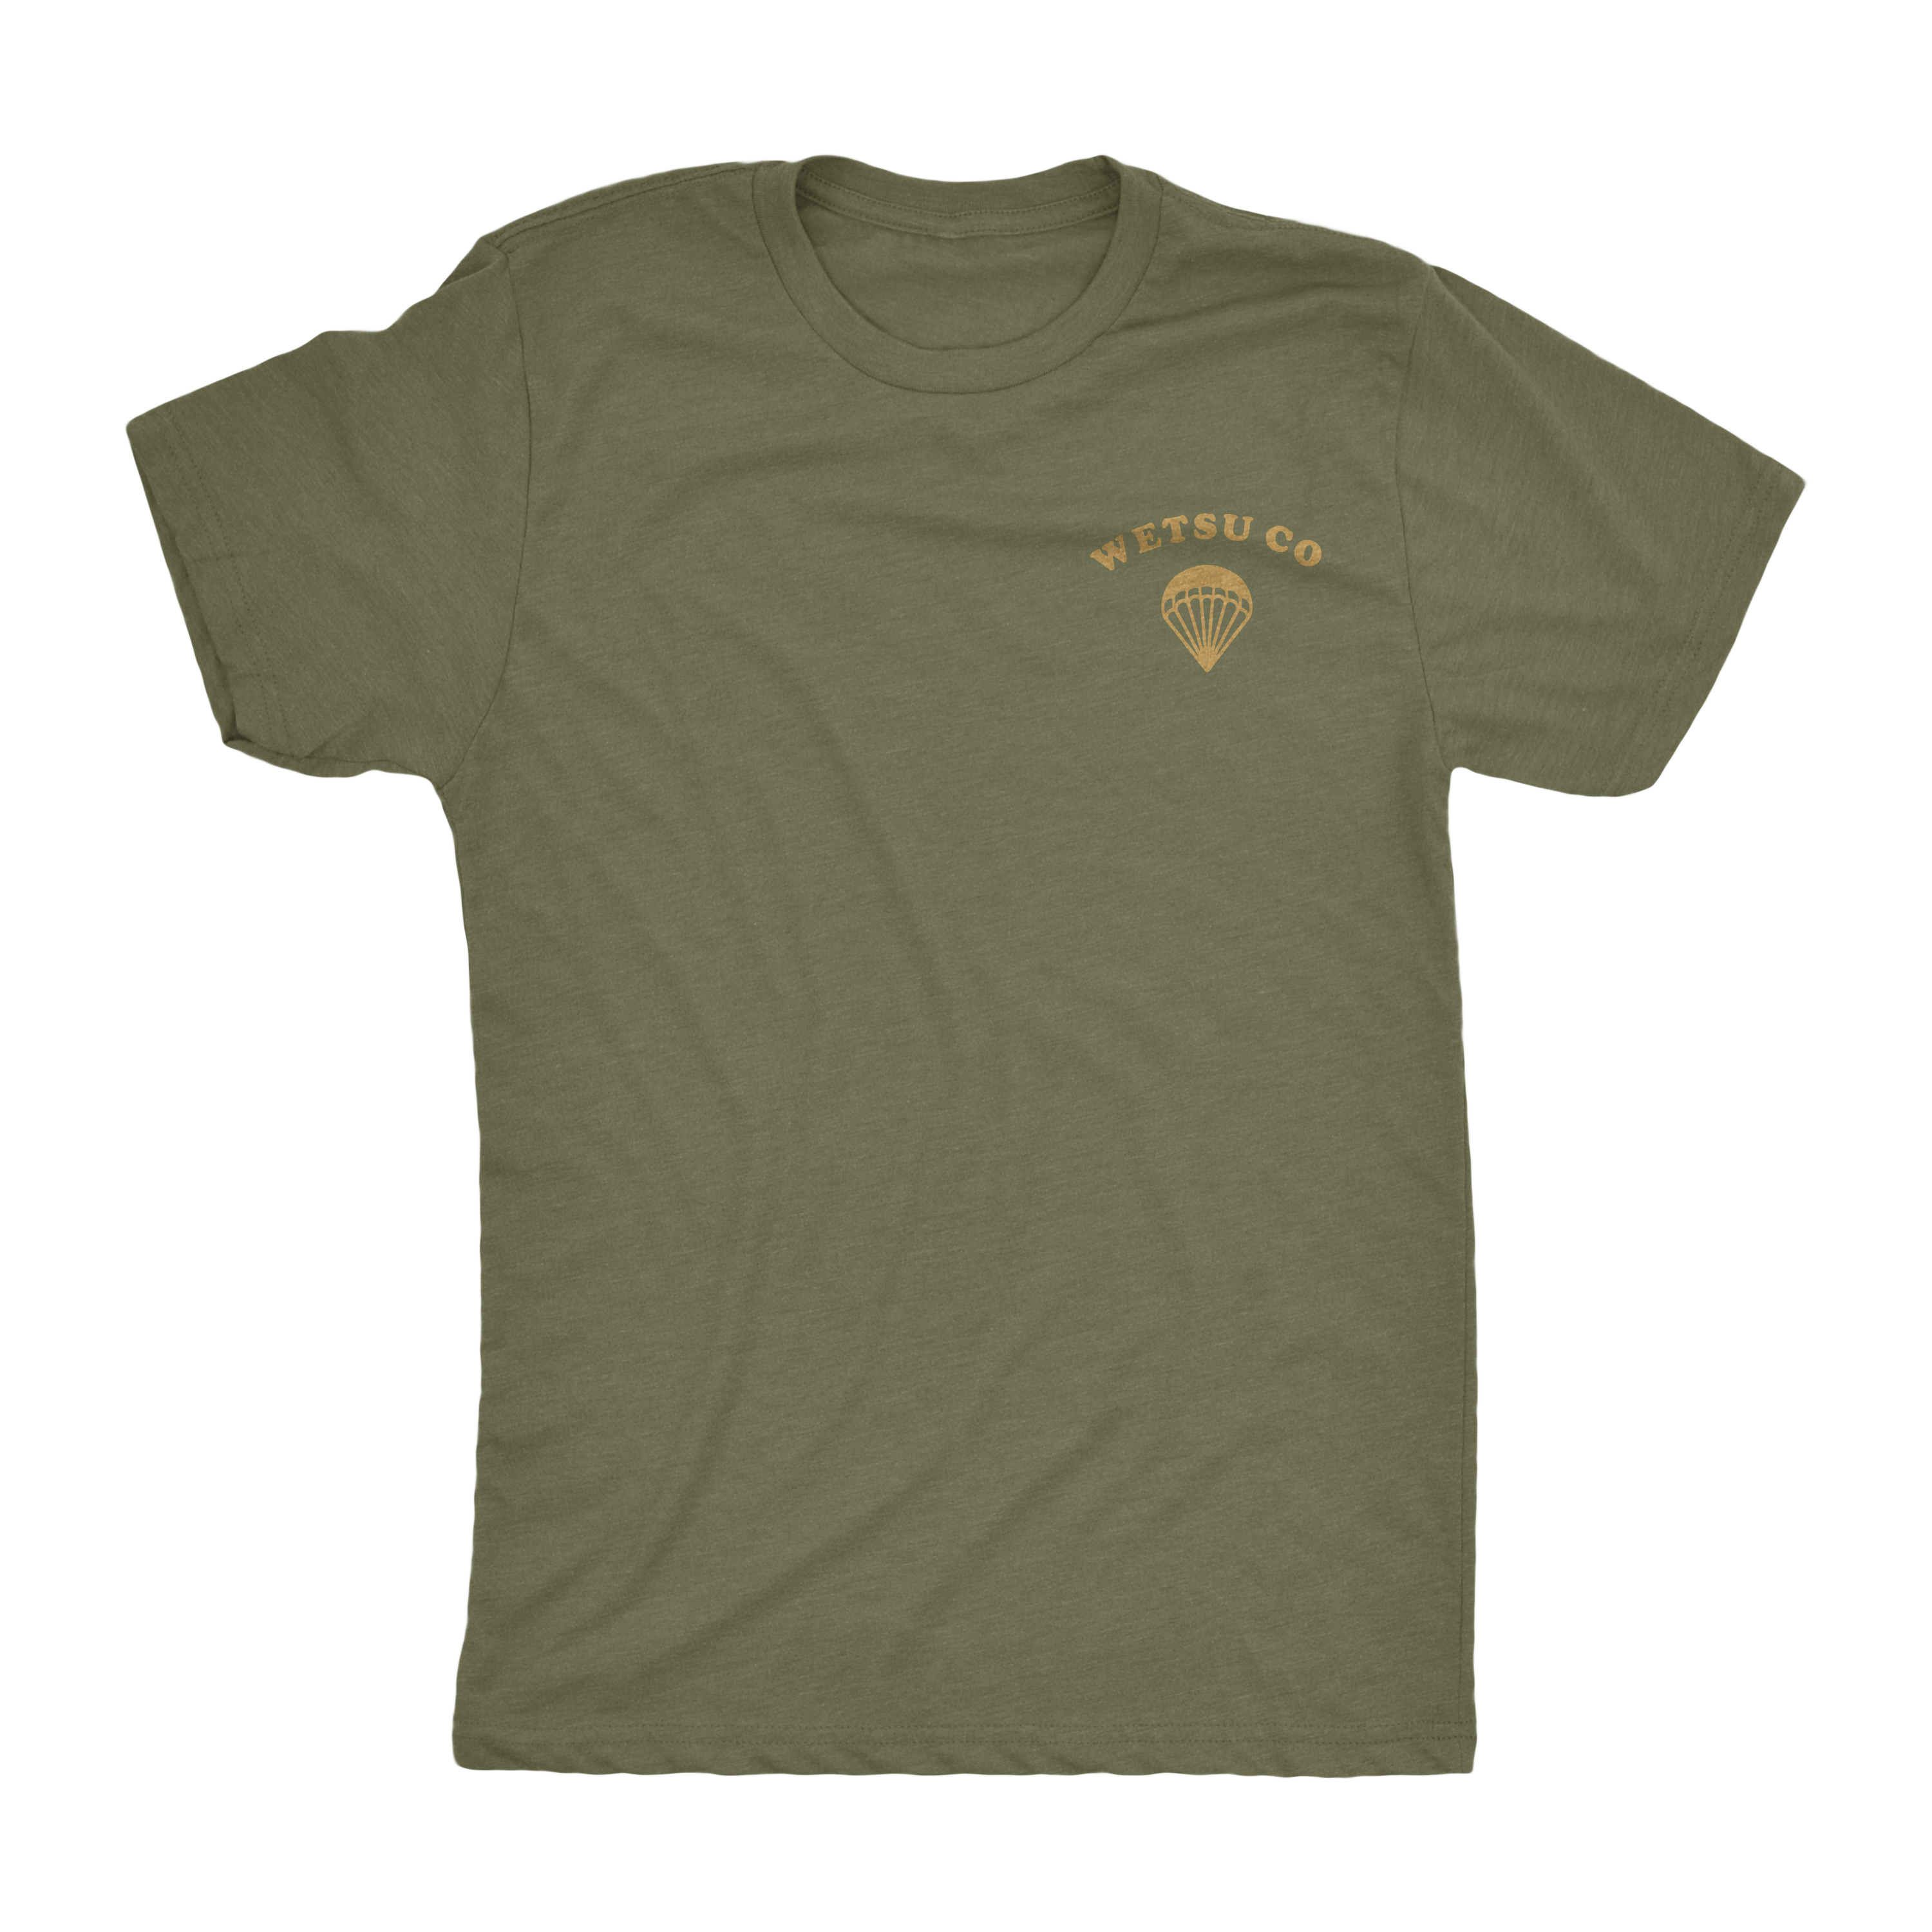 St. Michael Traditional Shirt Military Green